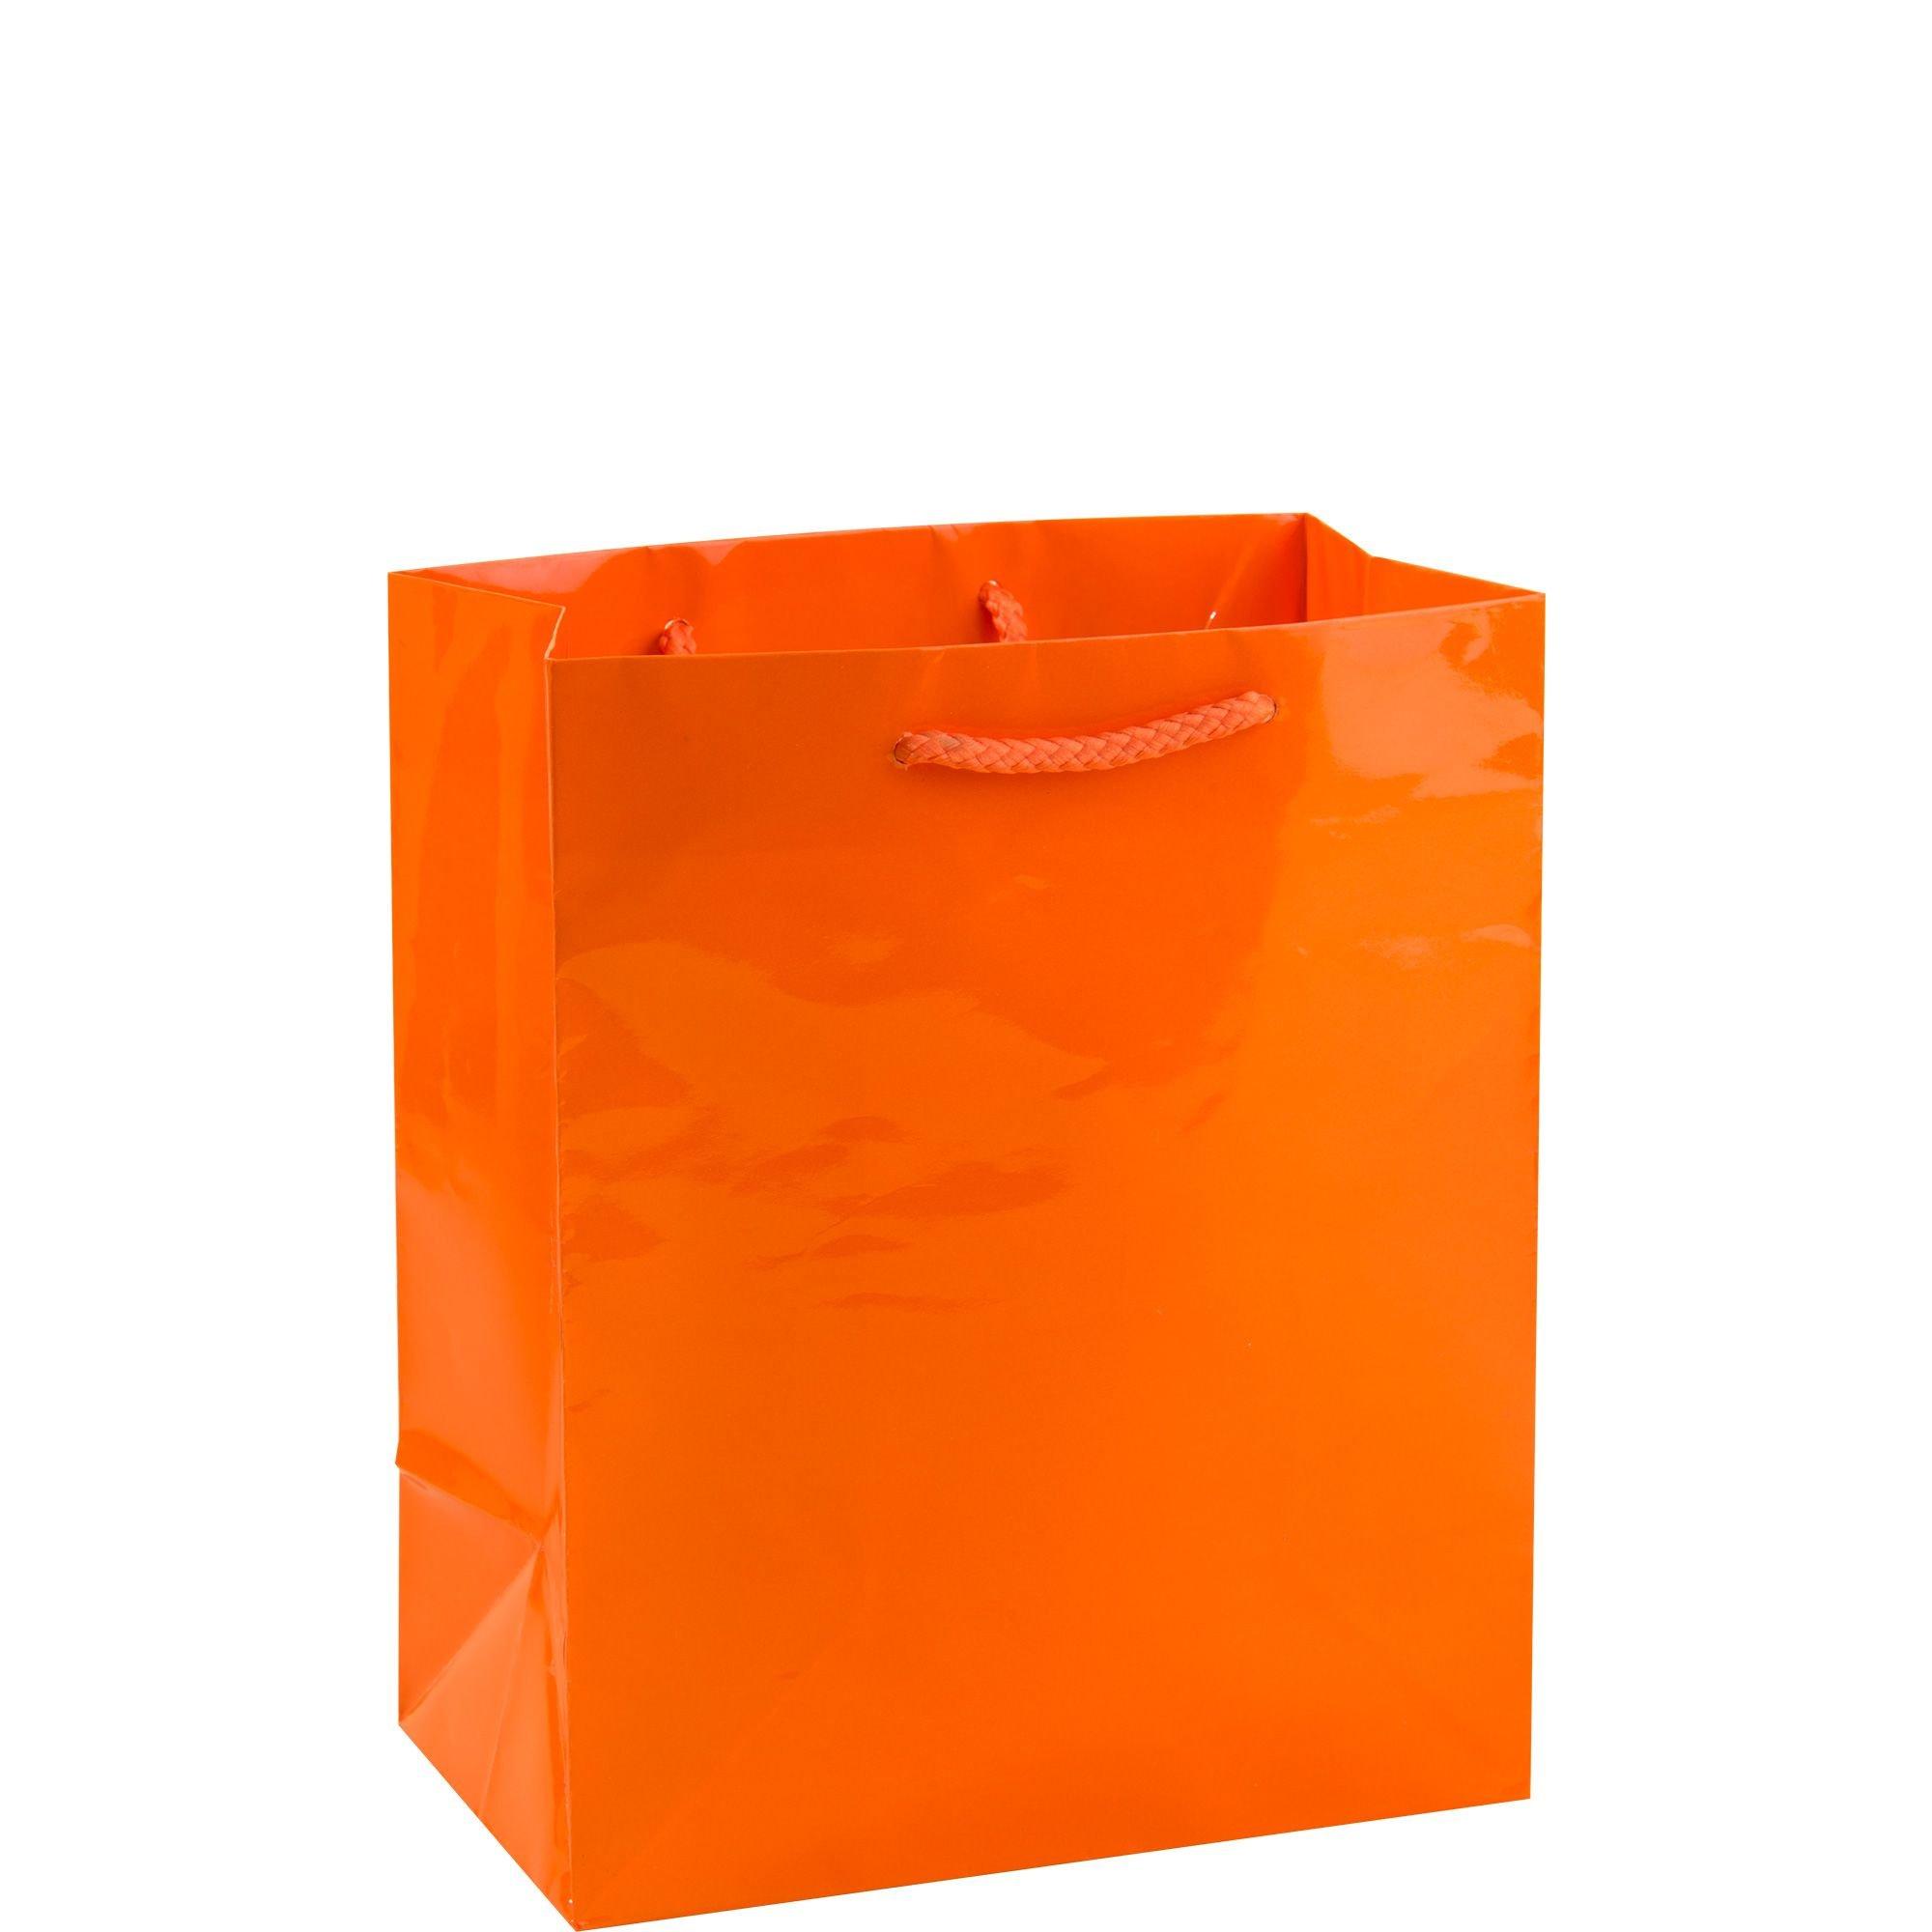 hand painted expensive orange plastic packing